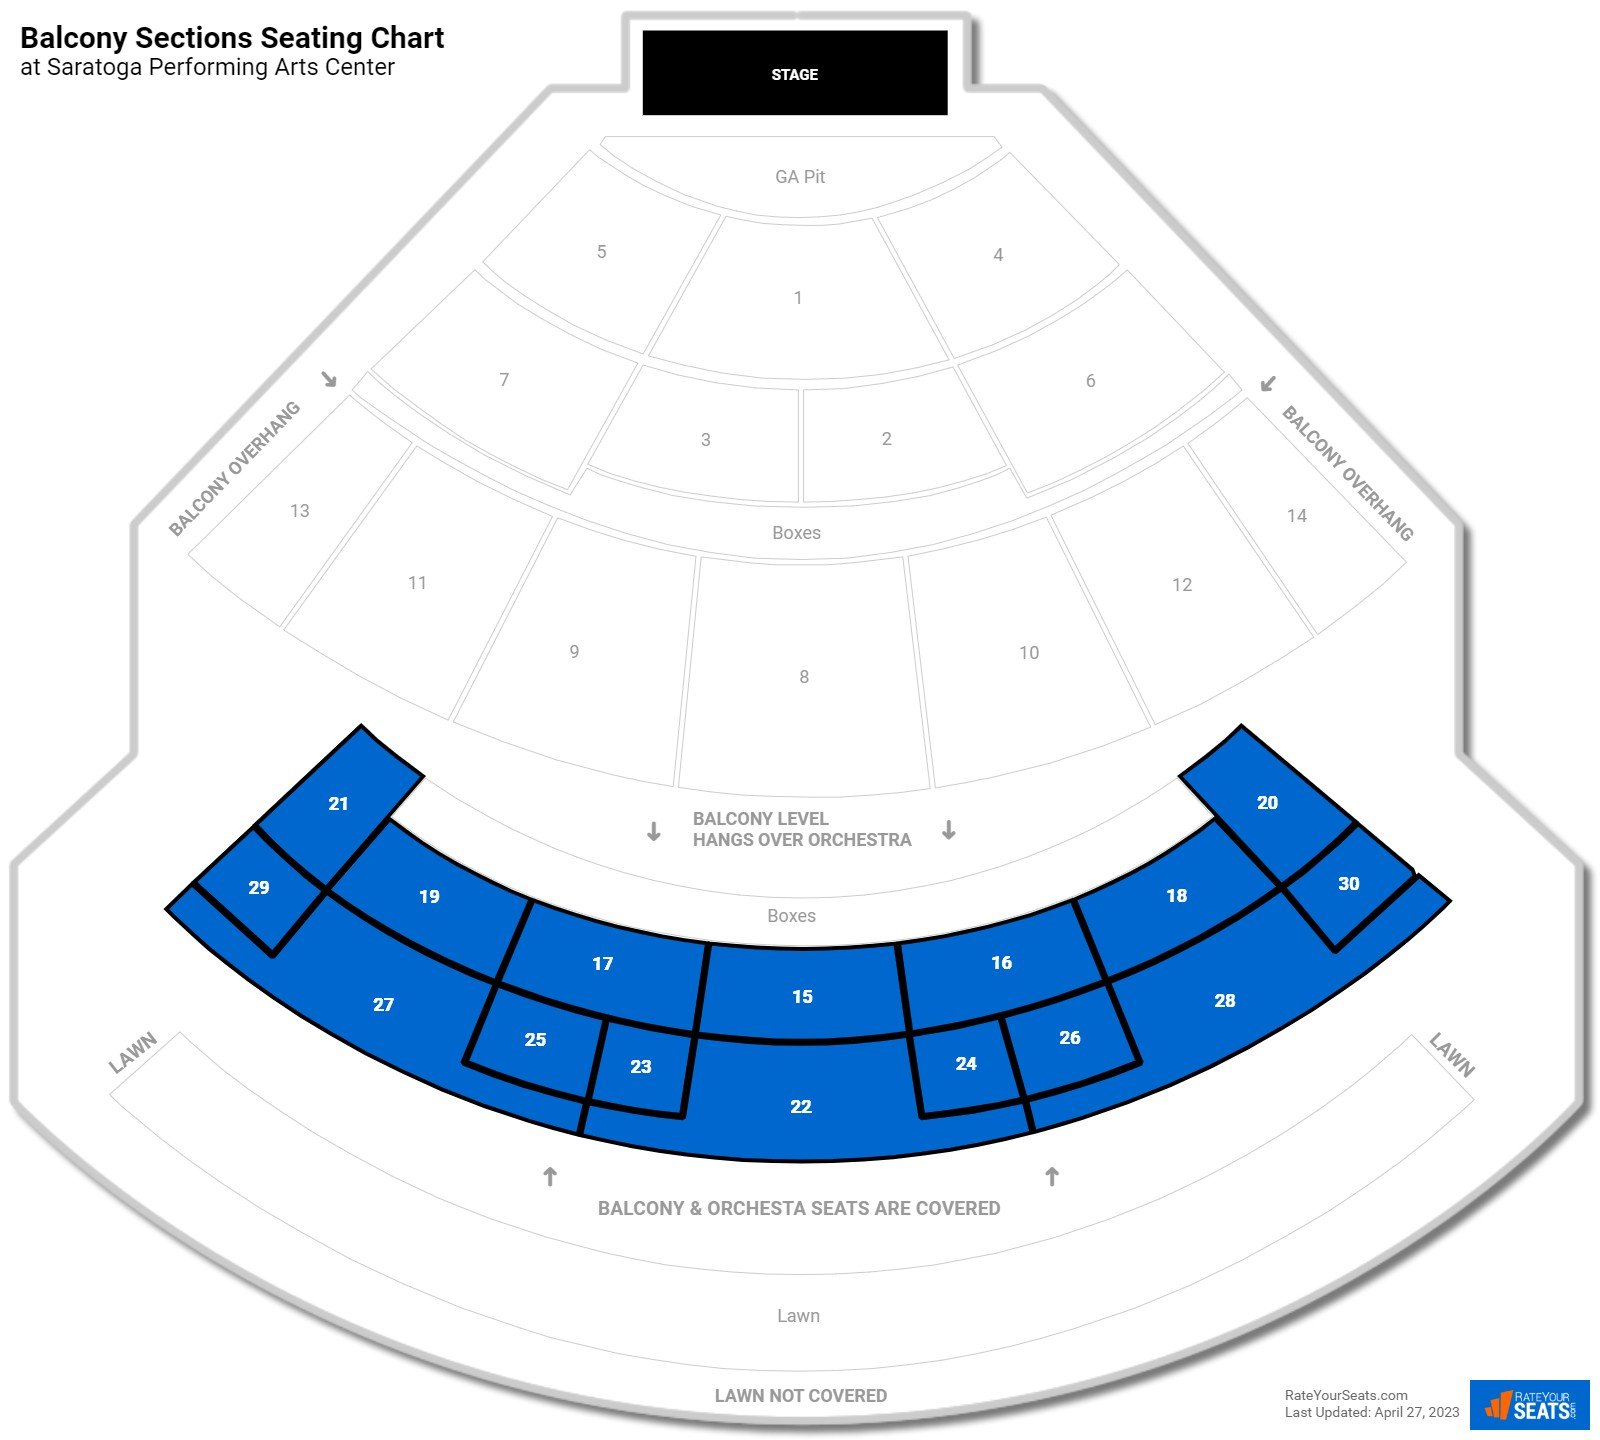 Concert Balcony Sections Seating Chart at Saratoga Performing Arts Center